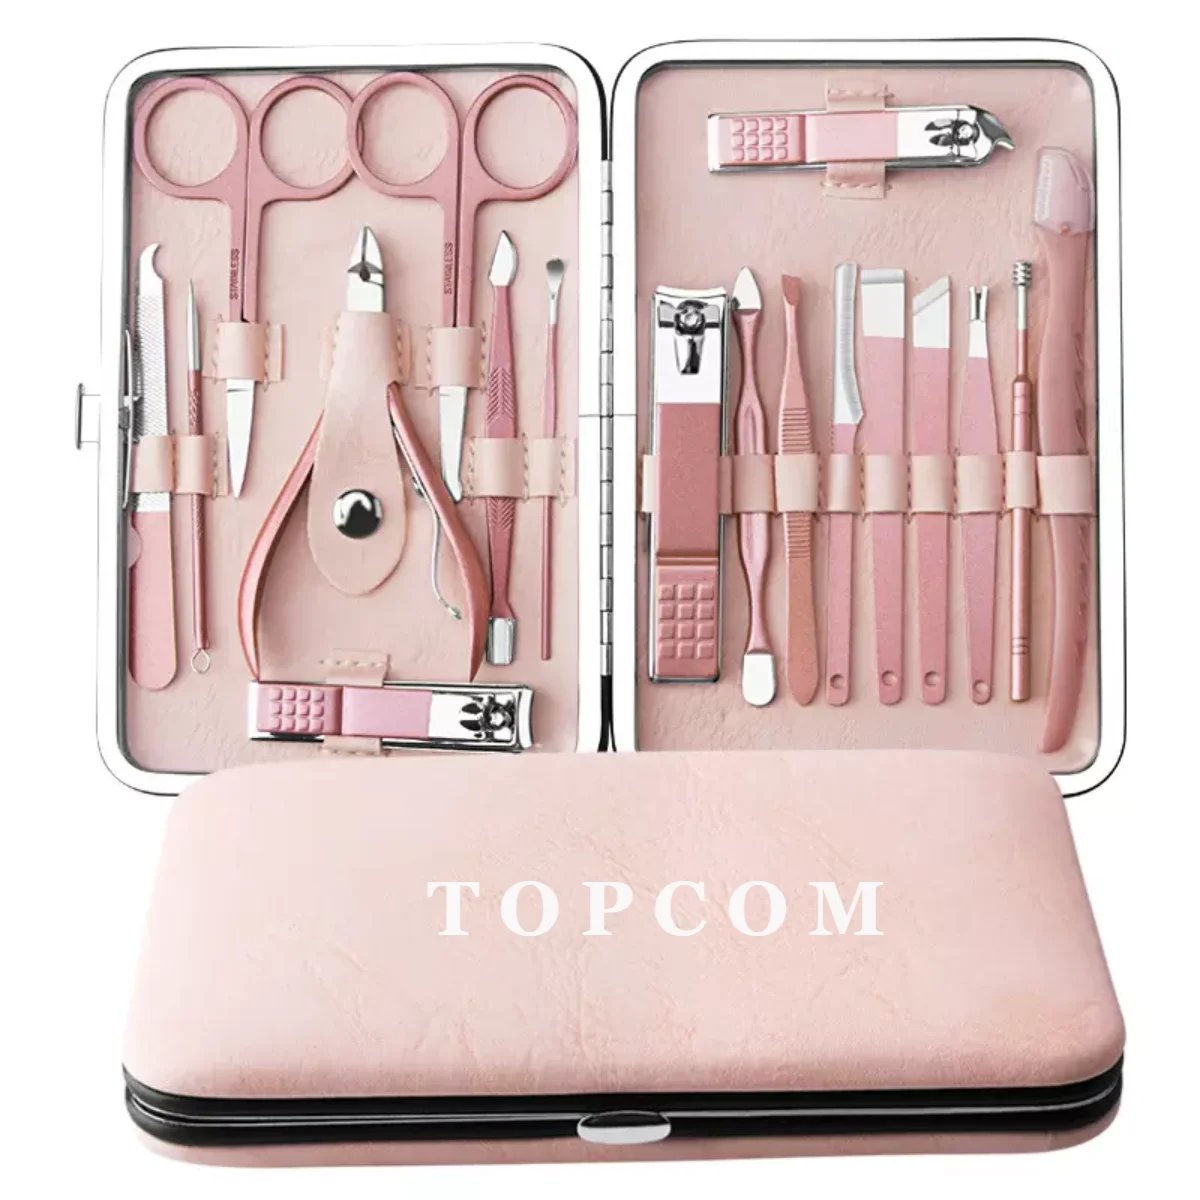 Promo 18piece Stainless Steel Nail Clippers Cutter Kit Nail Care Manicure Pedicure Set Buy Manicure Pedicure Set,Nail Care Set,Nail Clippers Cutter Kit Product on Alibaba.com